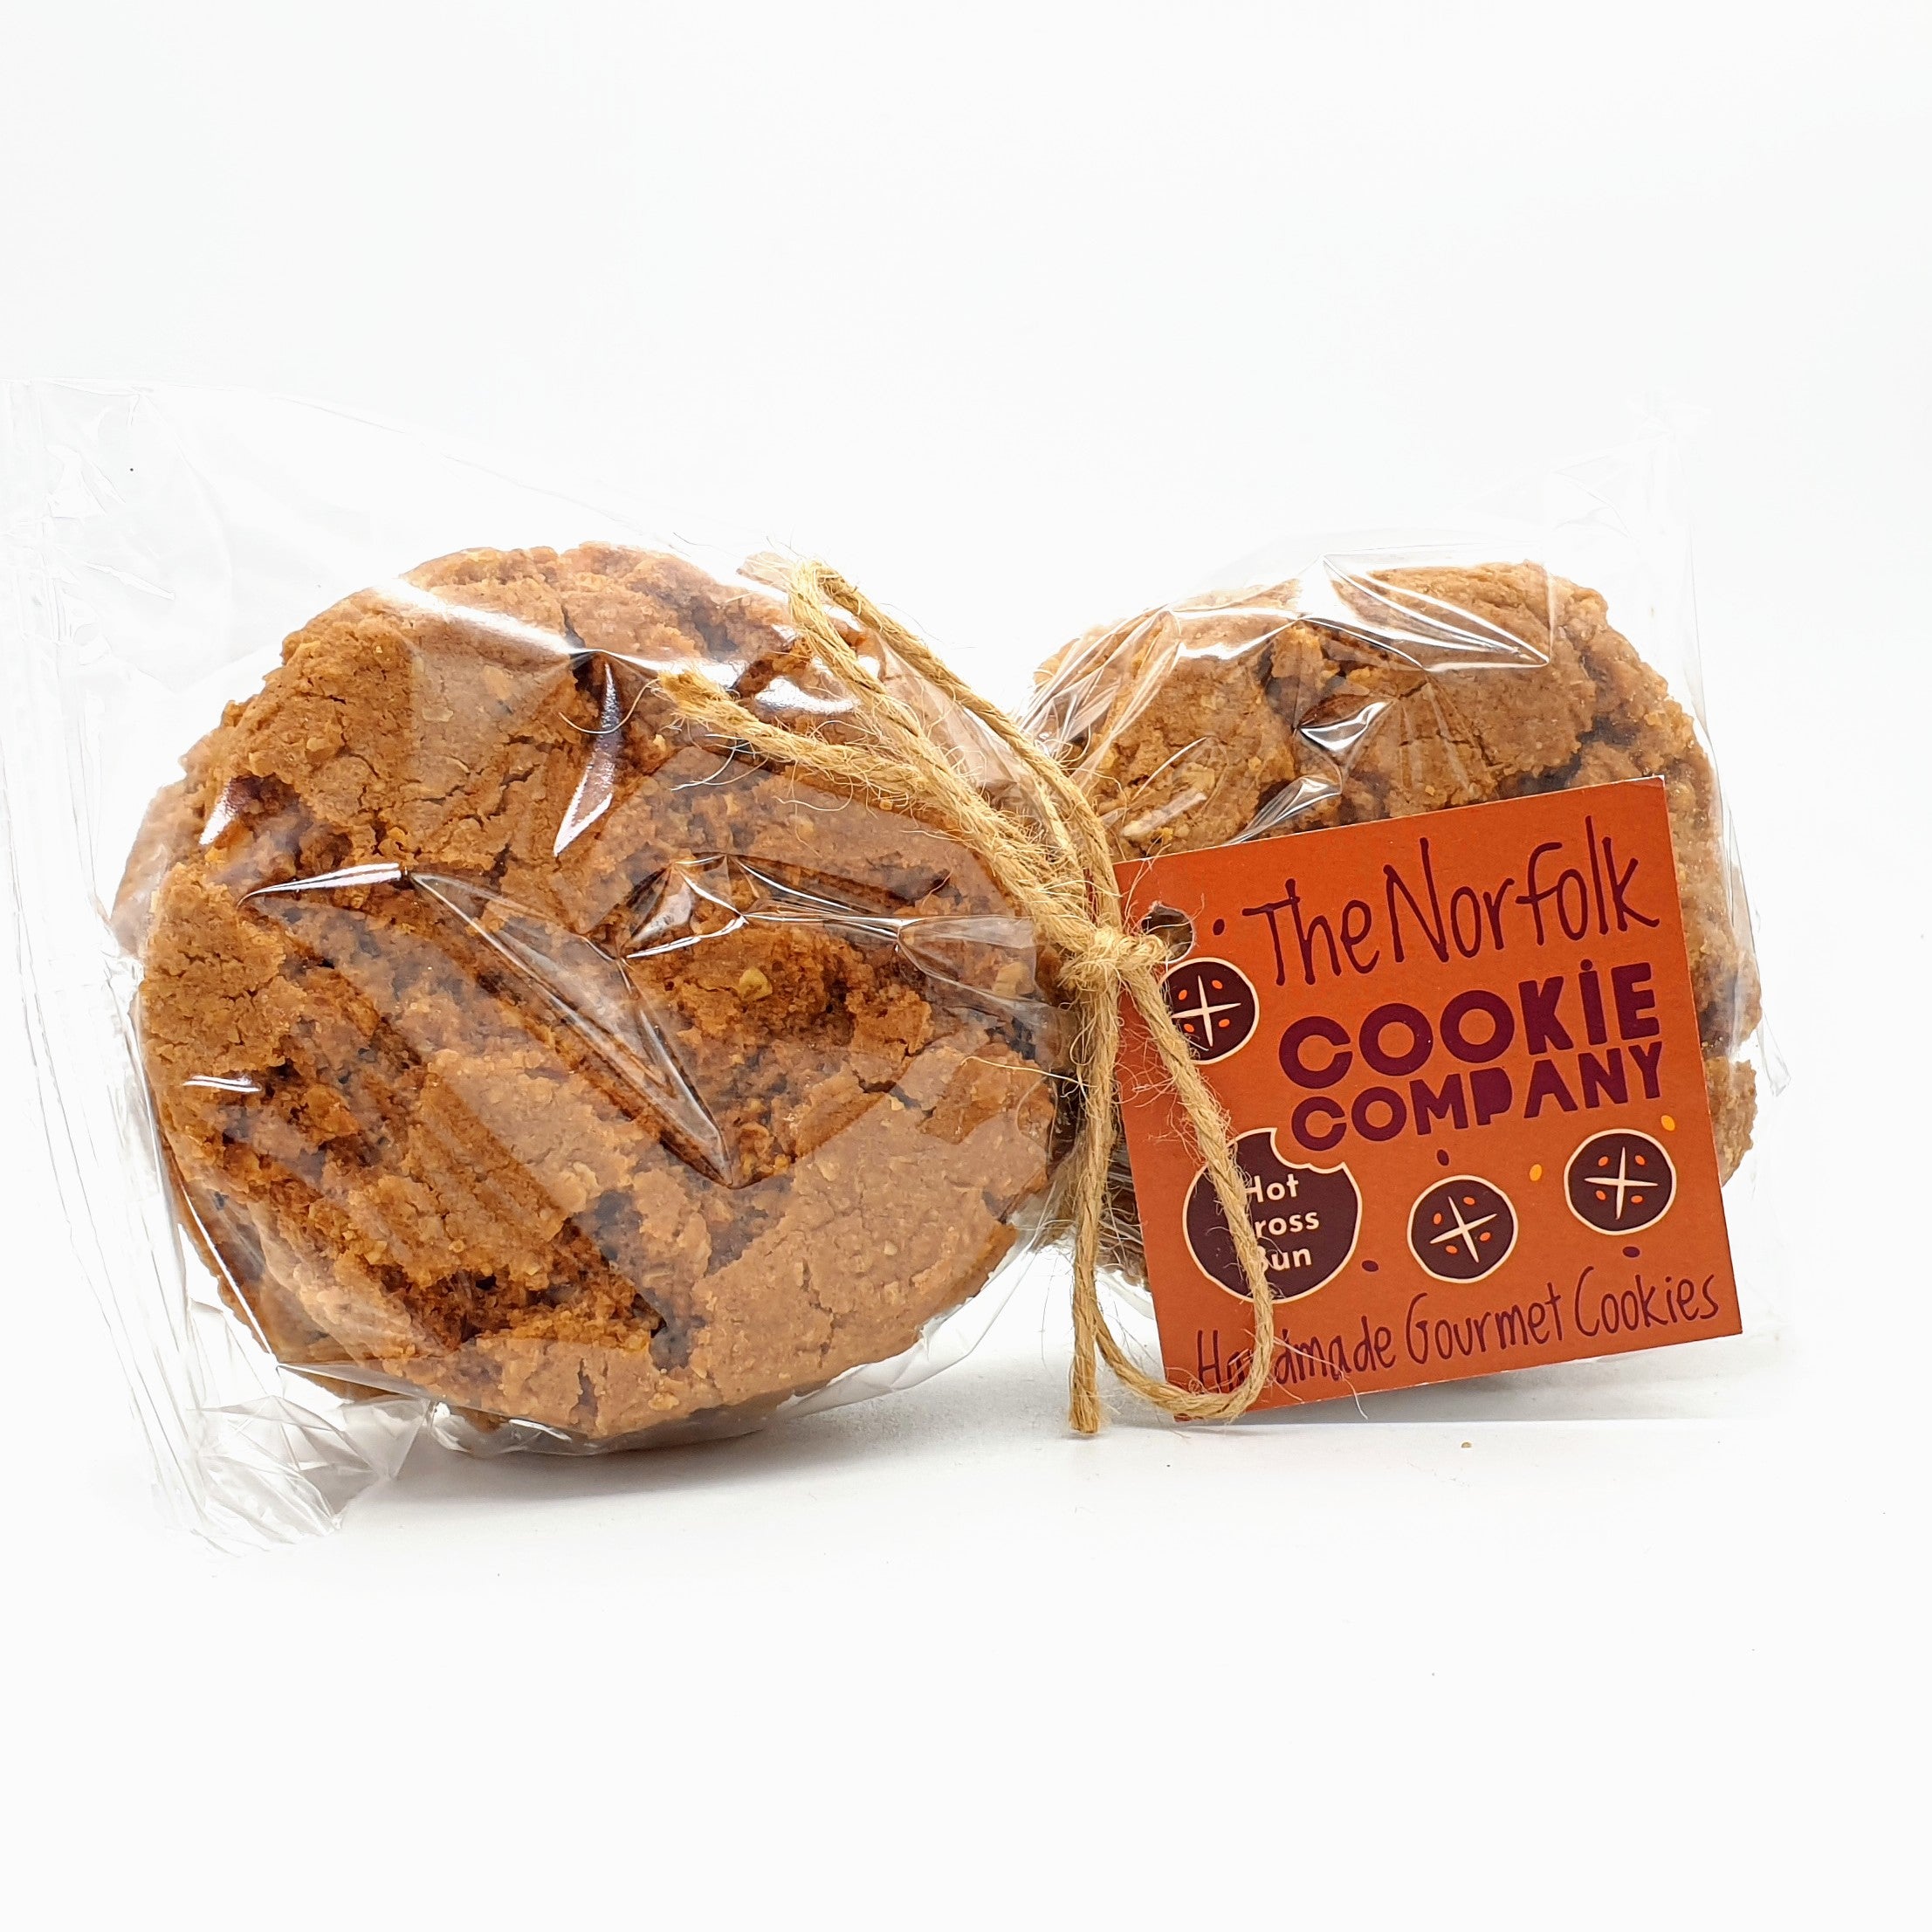 Limited Edition Hot Cross Bun Cookies (6 Pack)